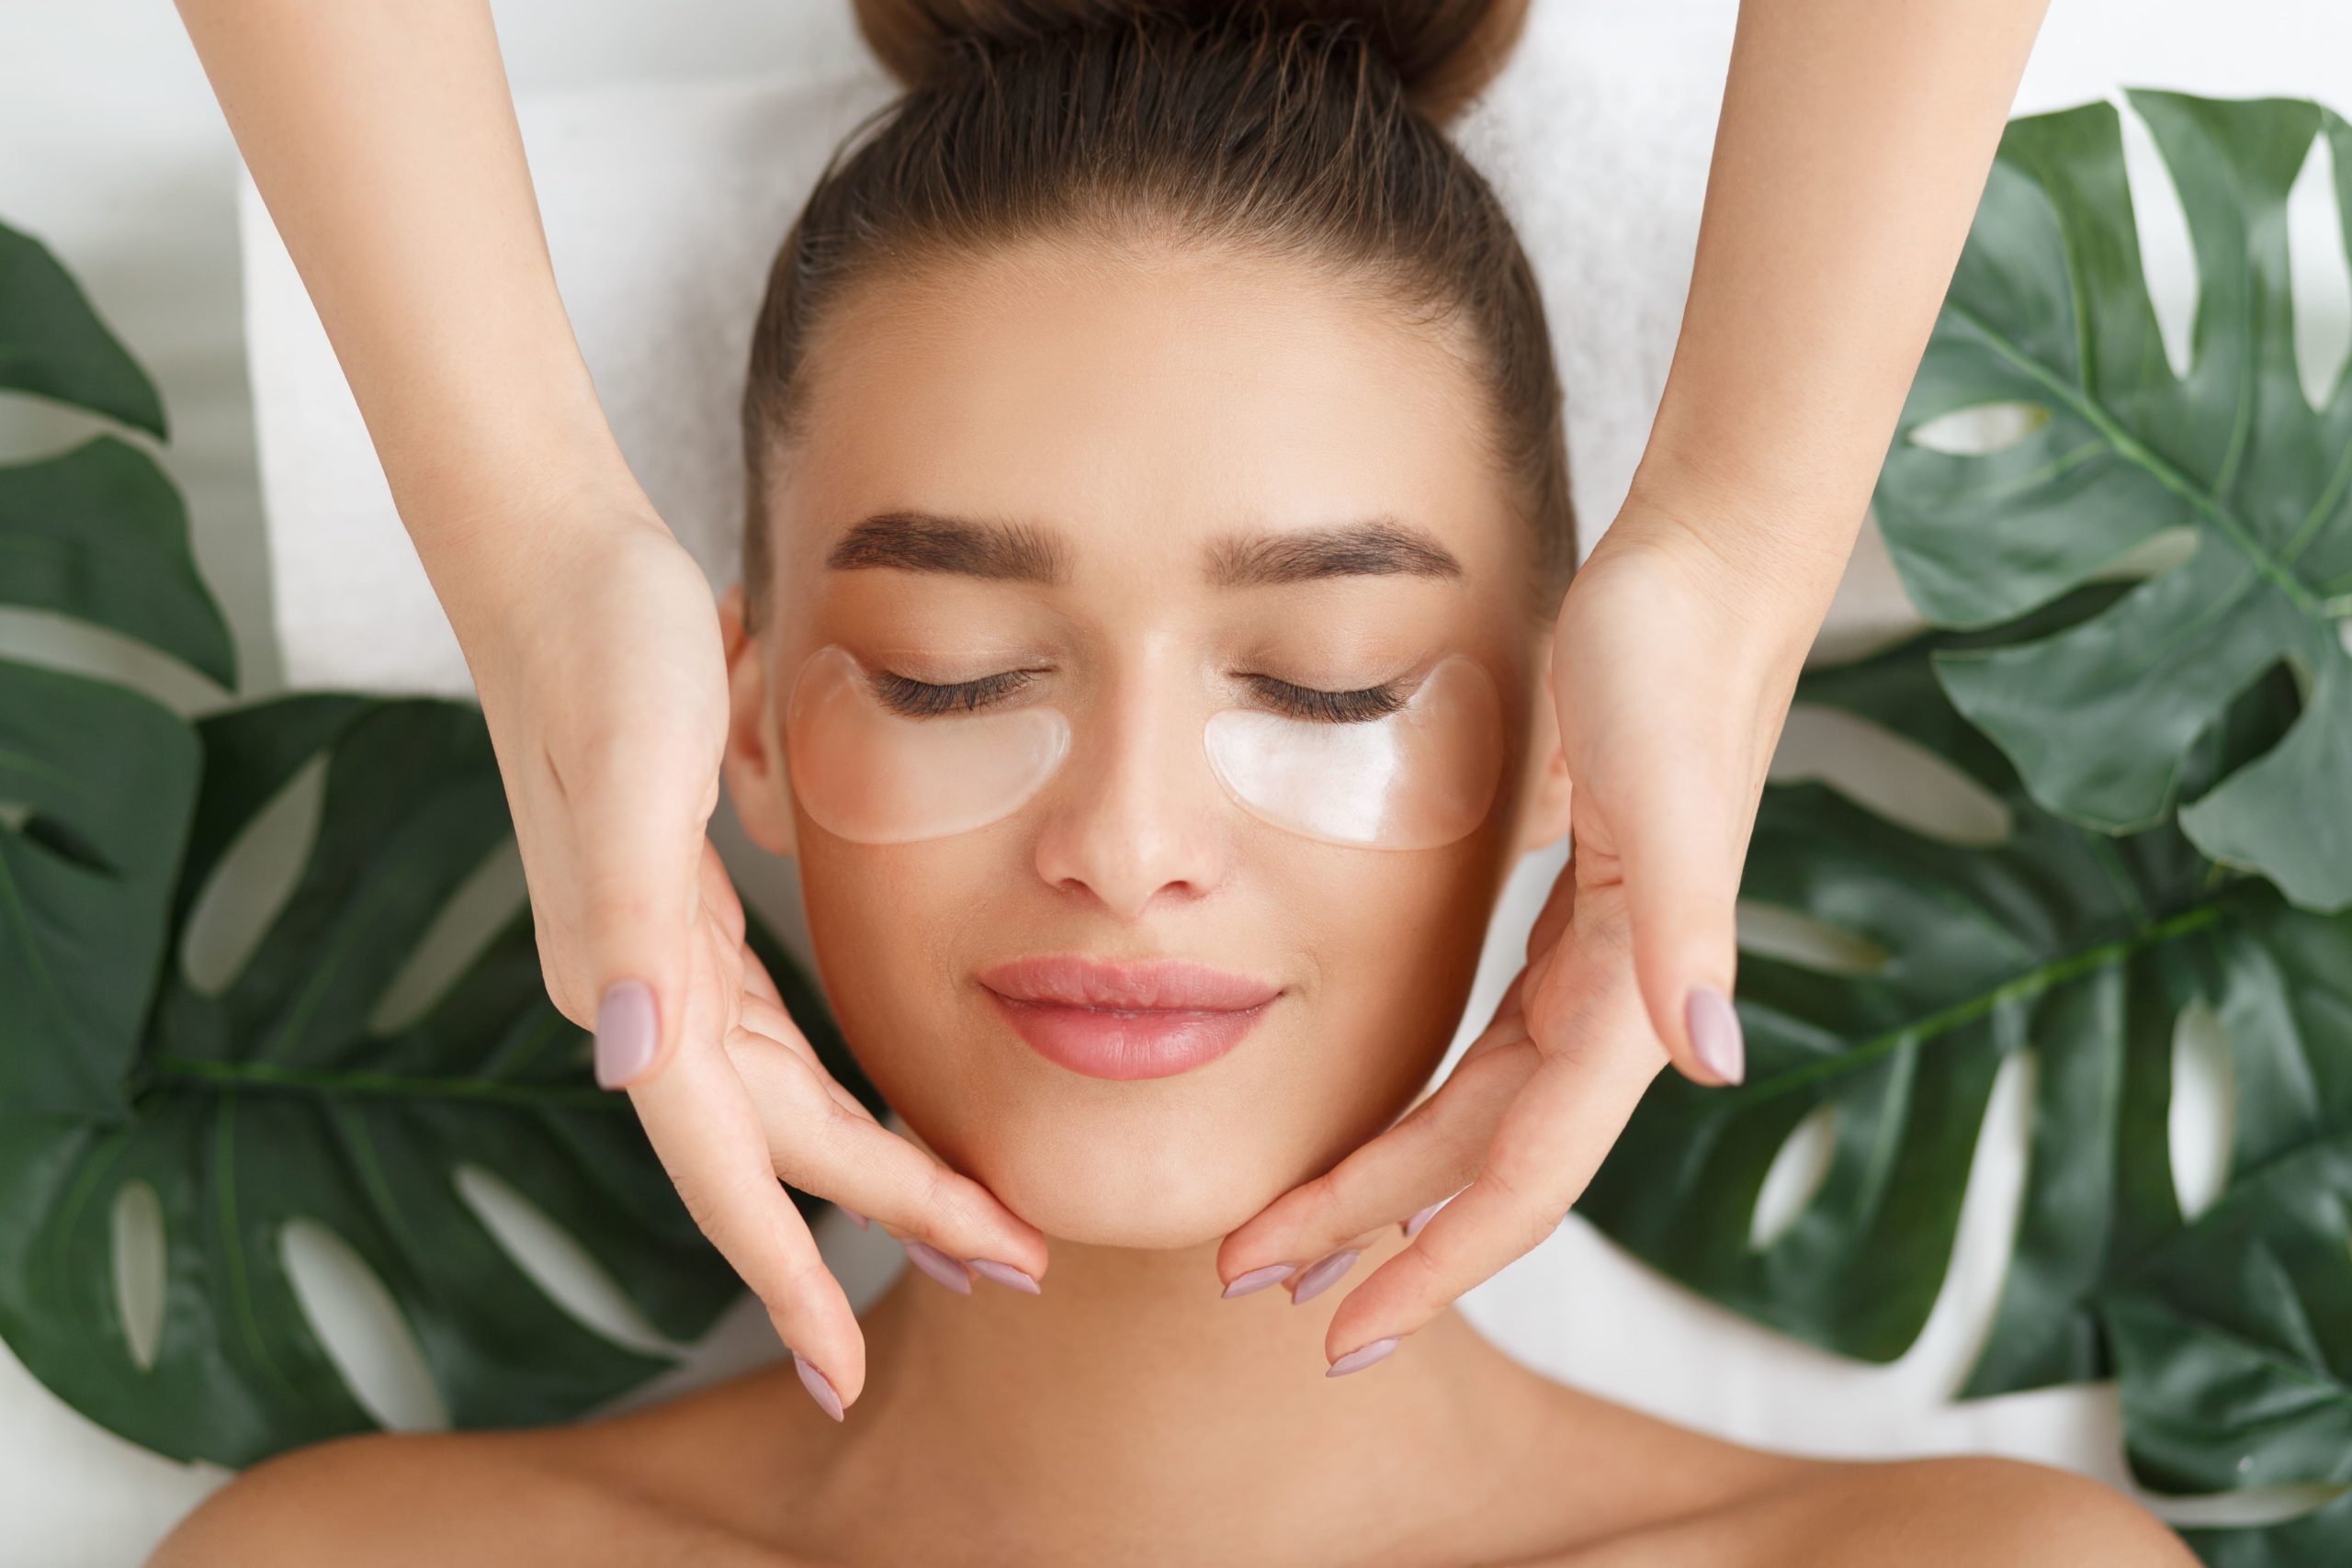 What are the benefits of a chemical peel